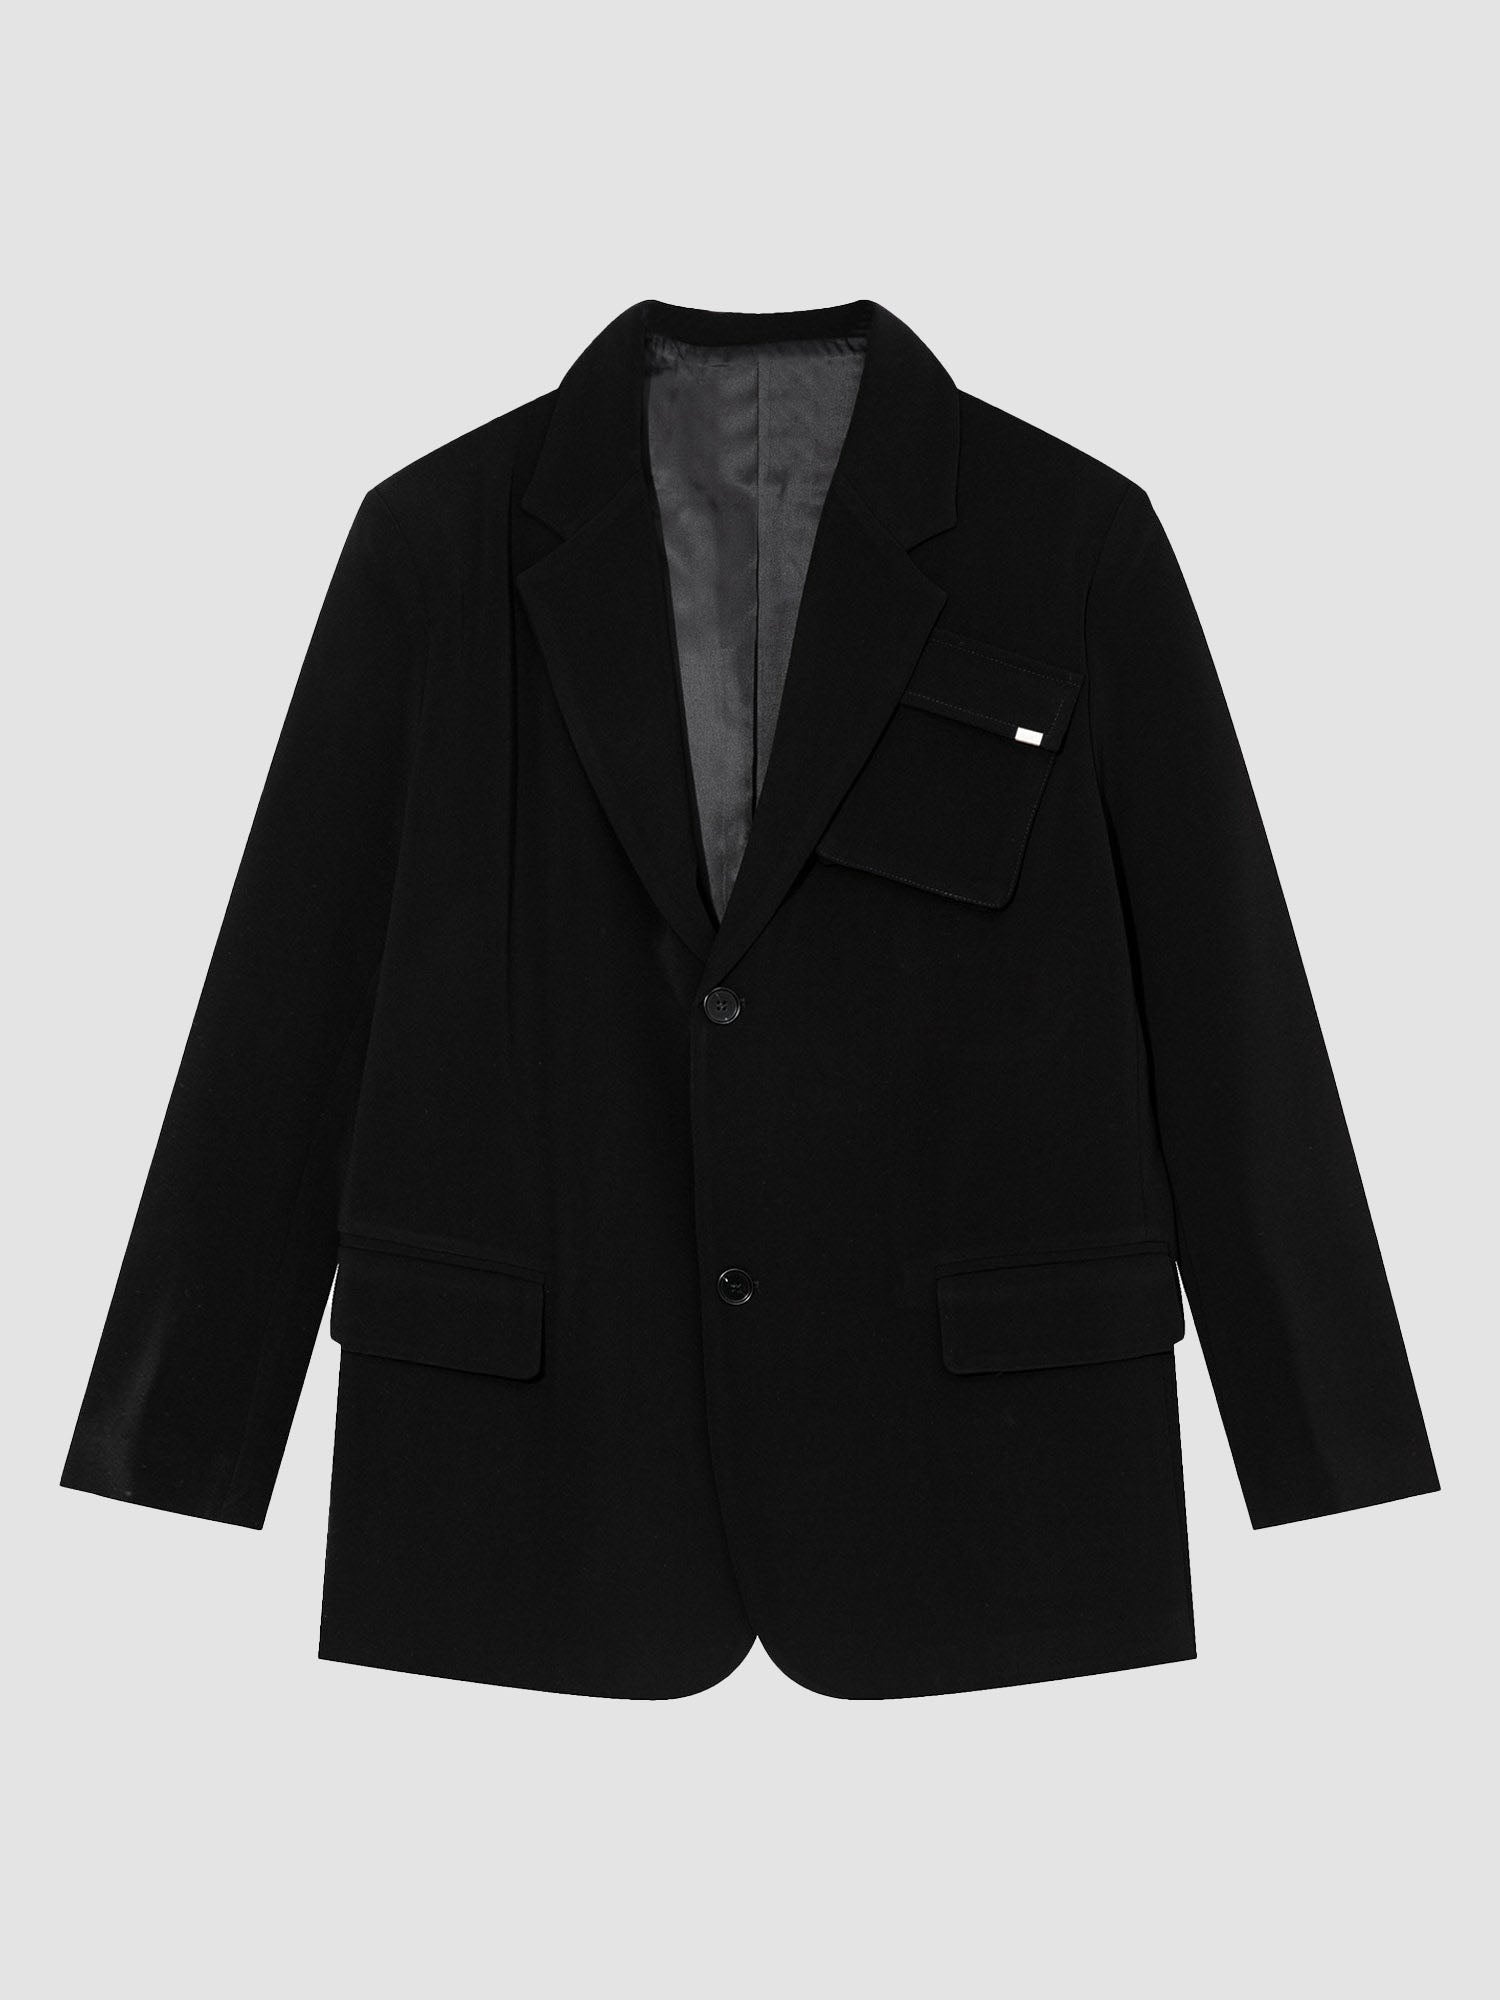 JUSTNOTAG Casual Plain Polyester Turn-down Collar Suit jacket